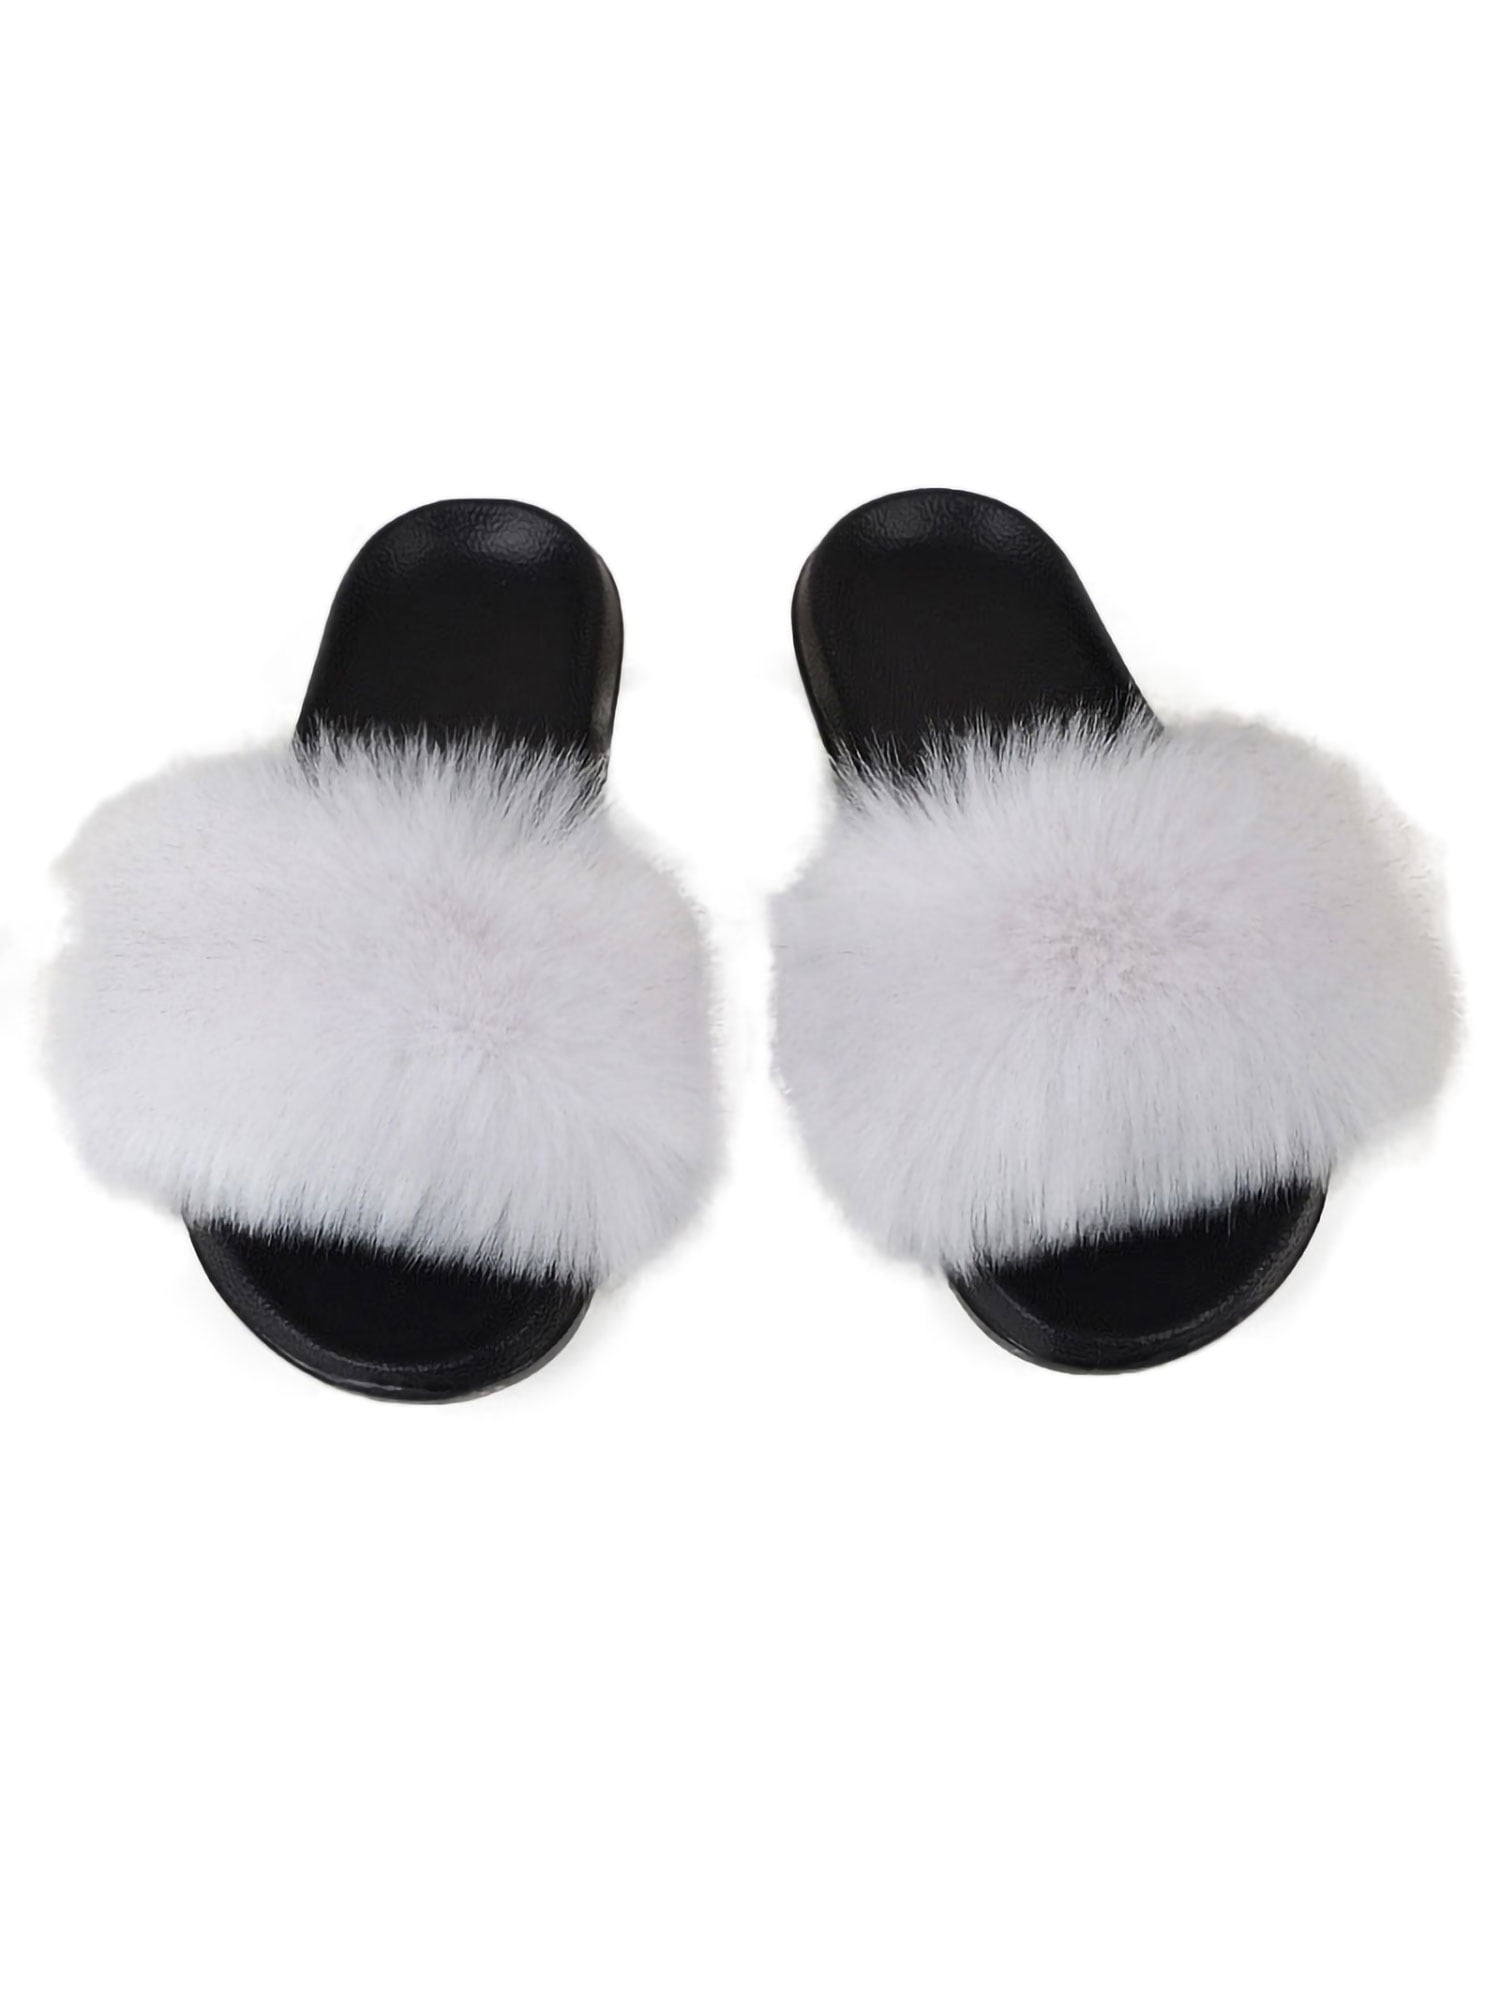 Details about   Women Ladies Fur Fluffy Sliders Slippers Slip On Flat Sandals Mules Summer Shoes